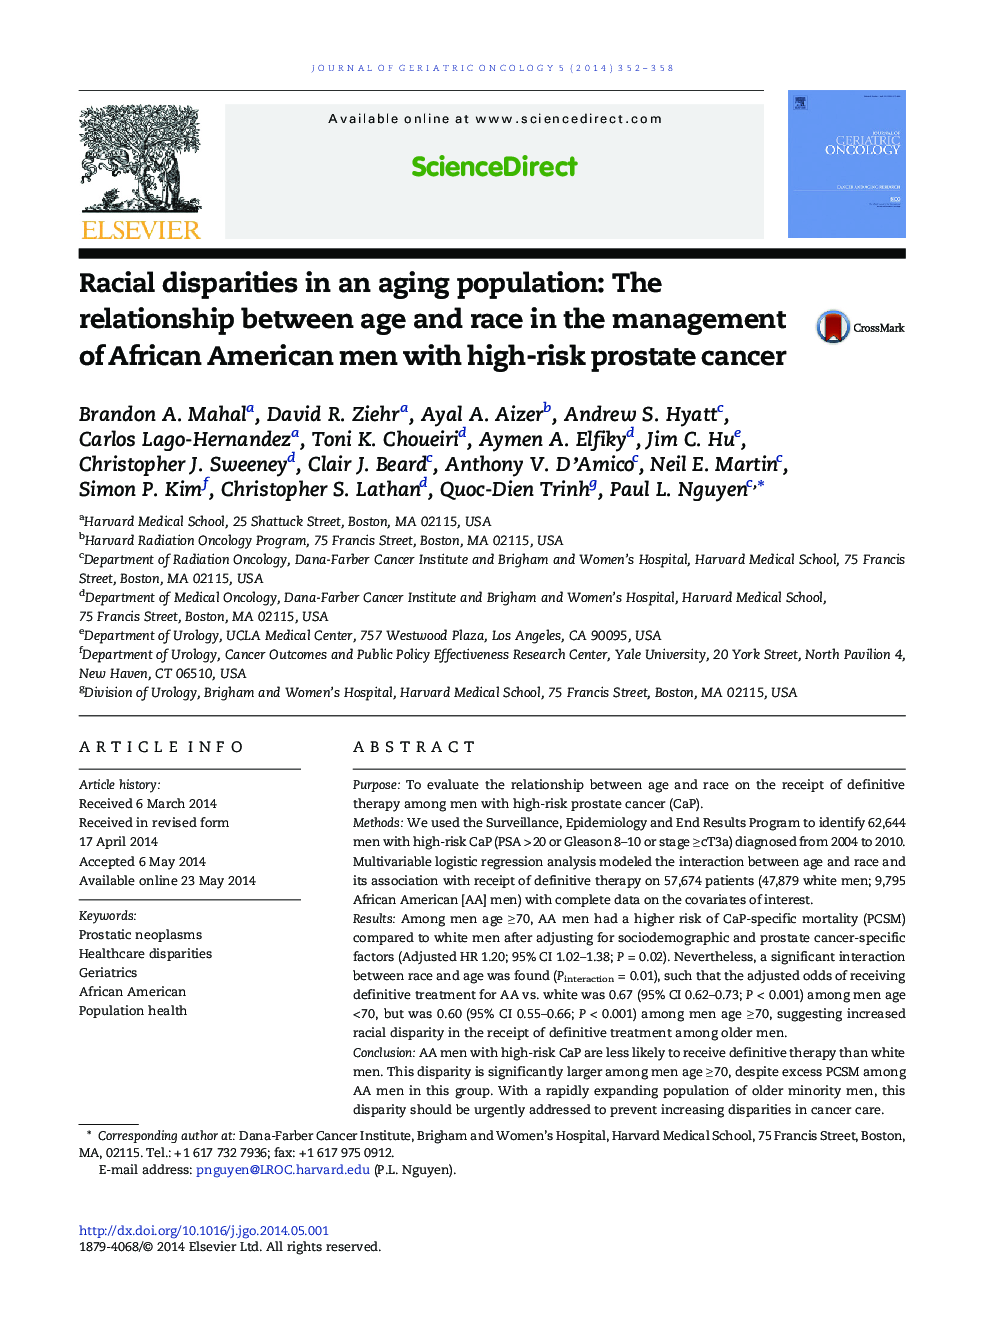 Racial disparities in an aging population: The relationship between age and race in the management of African American men with high-risk prostate cancer